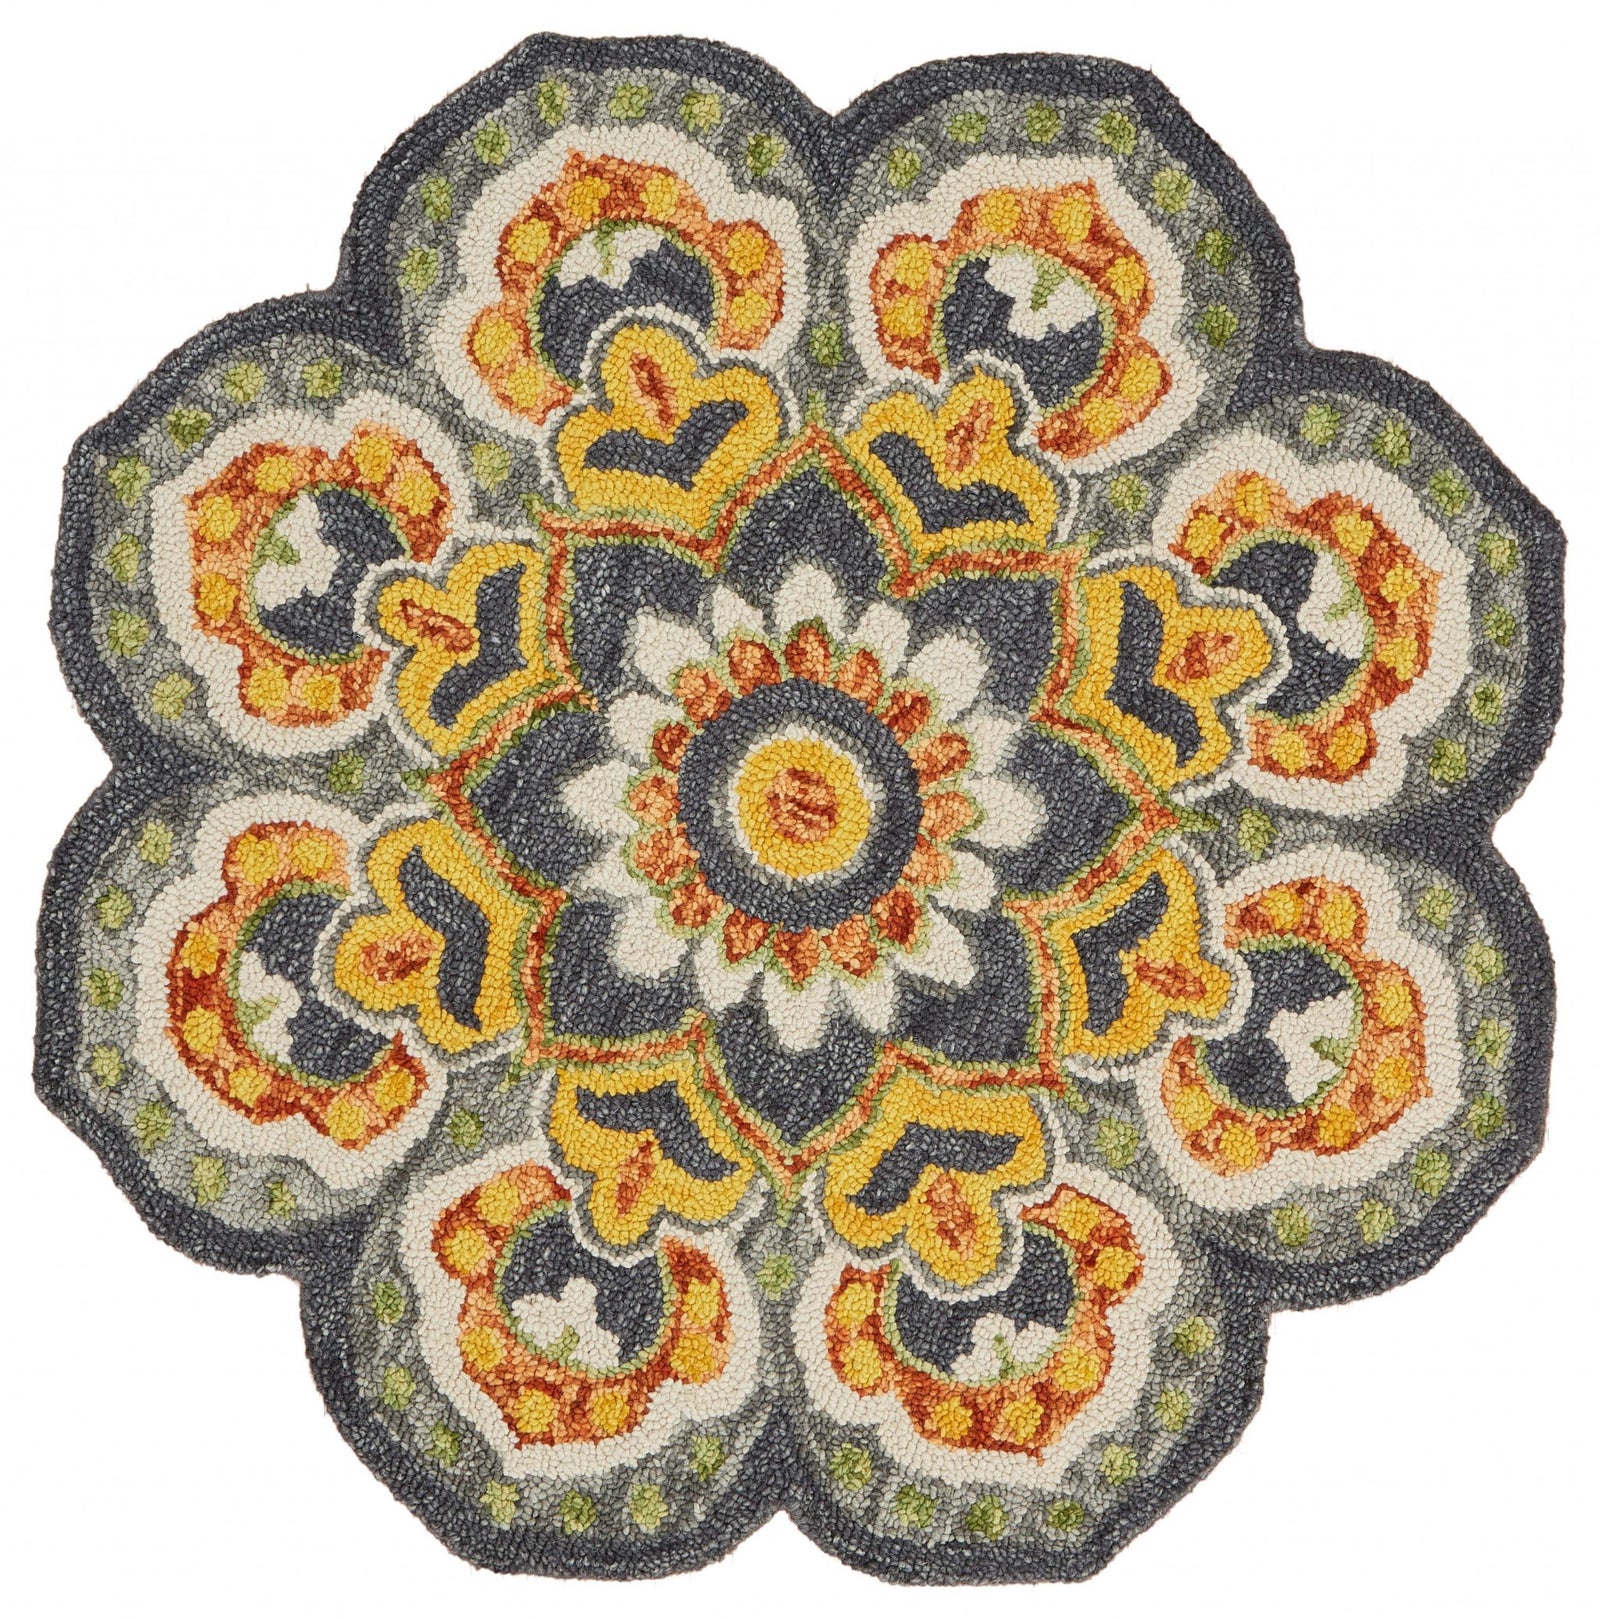 4’ Round Gray And Gold Floret Area Rug